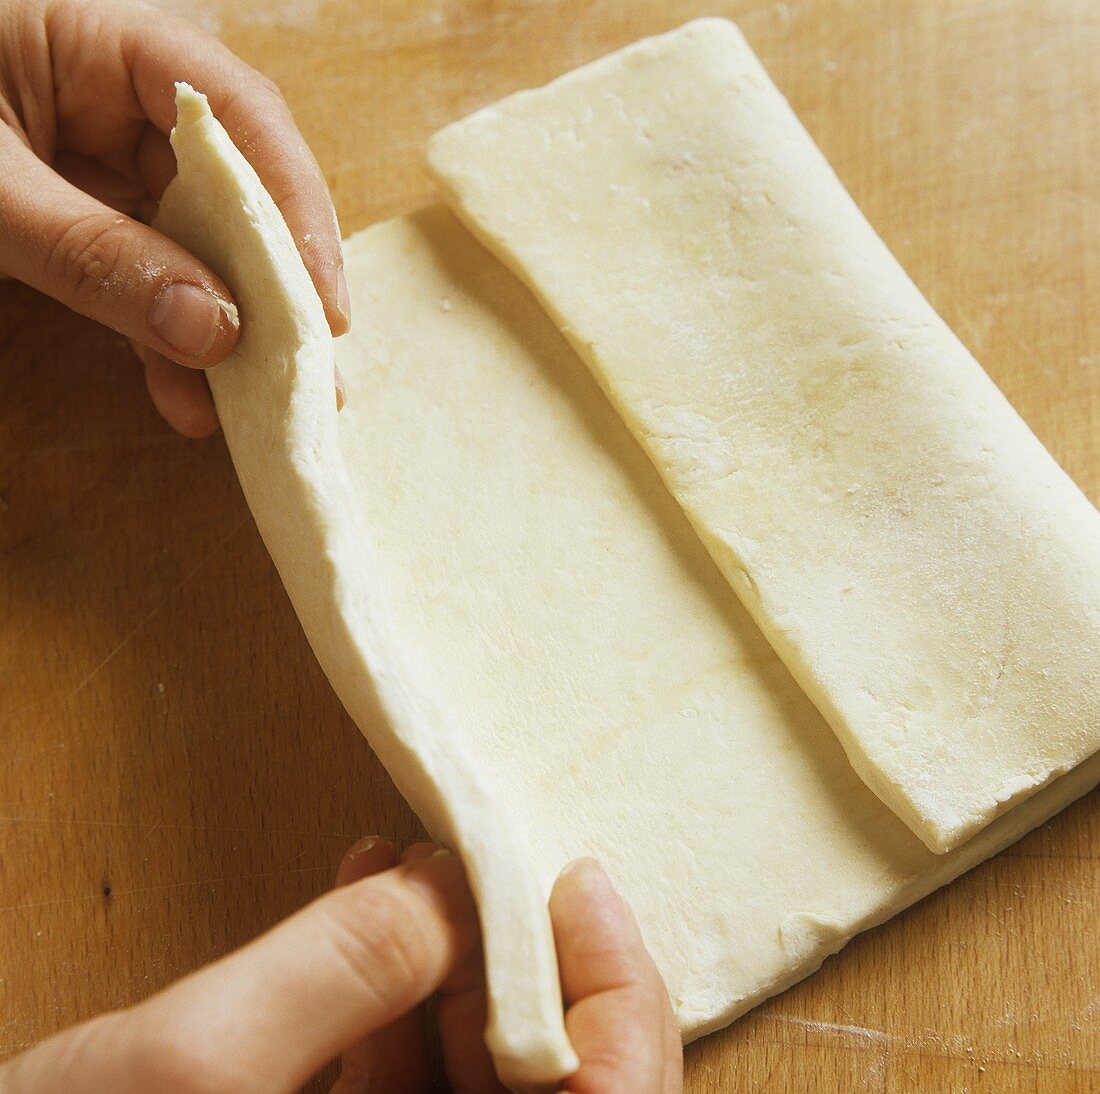 Making puff pastry (folding to the middle)